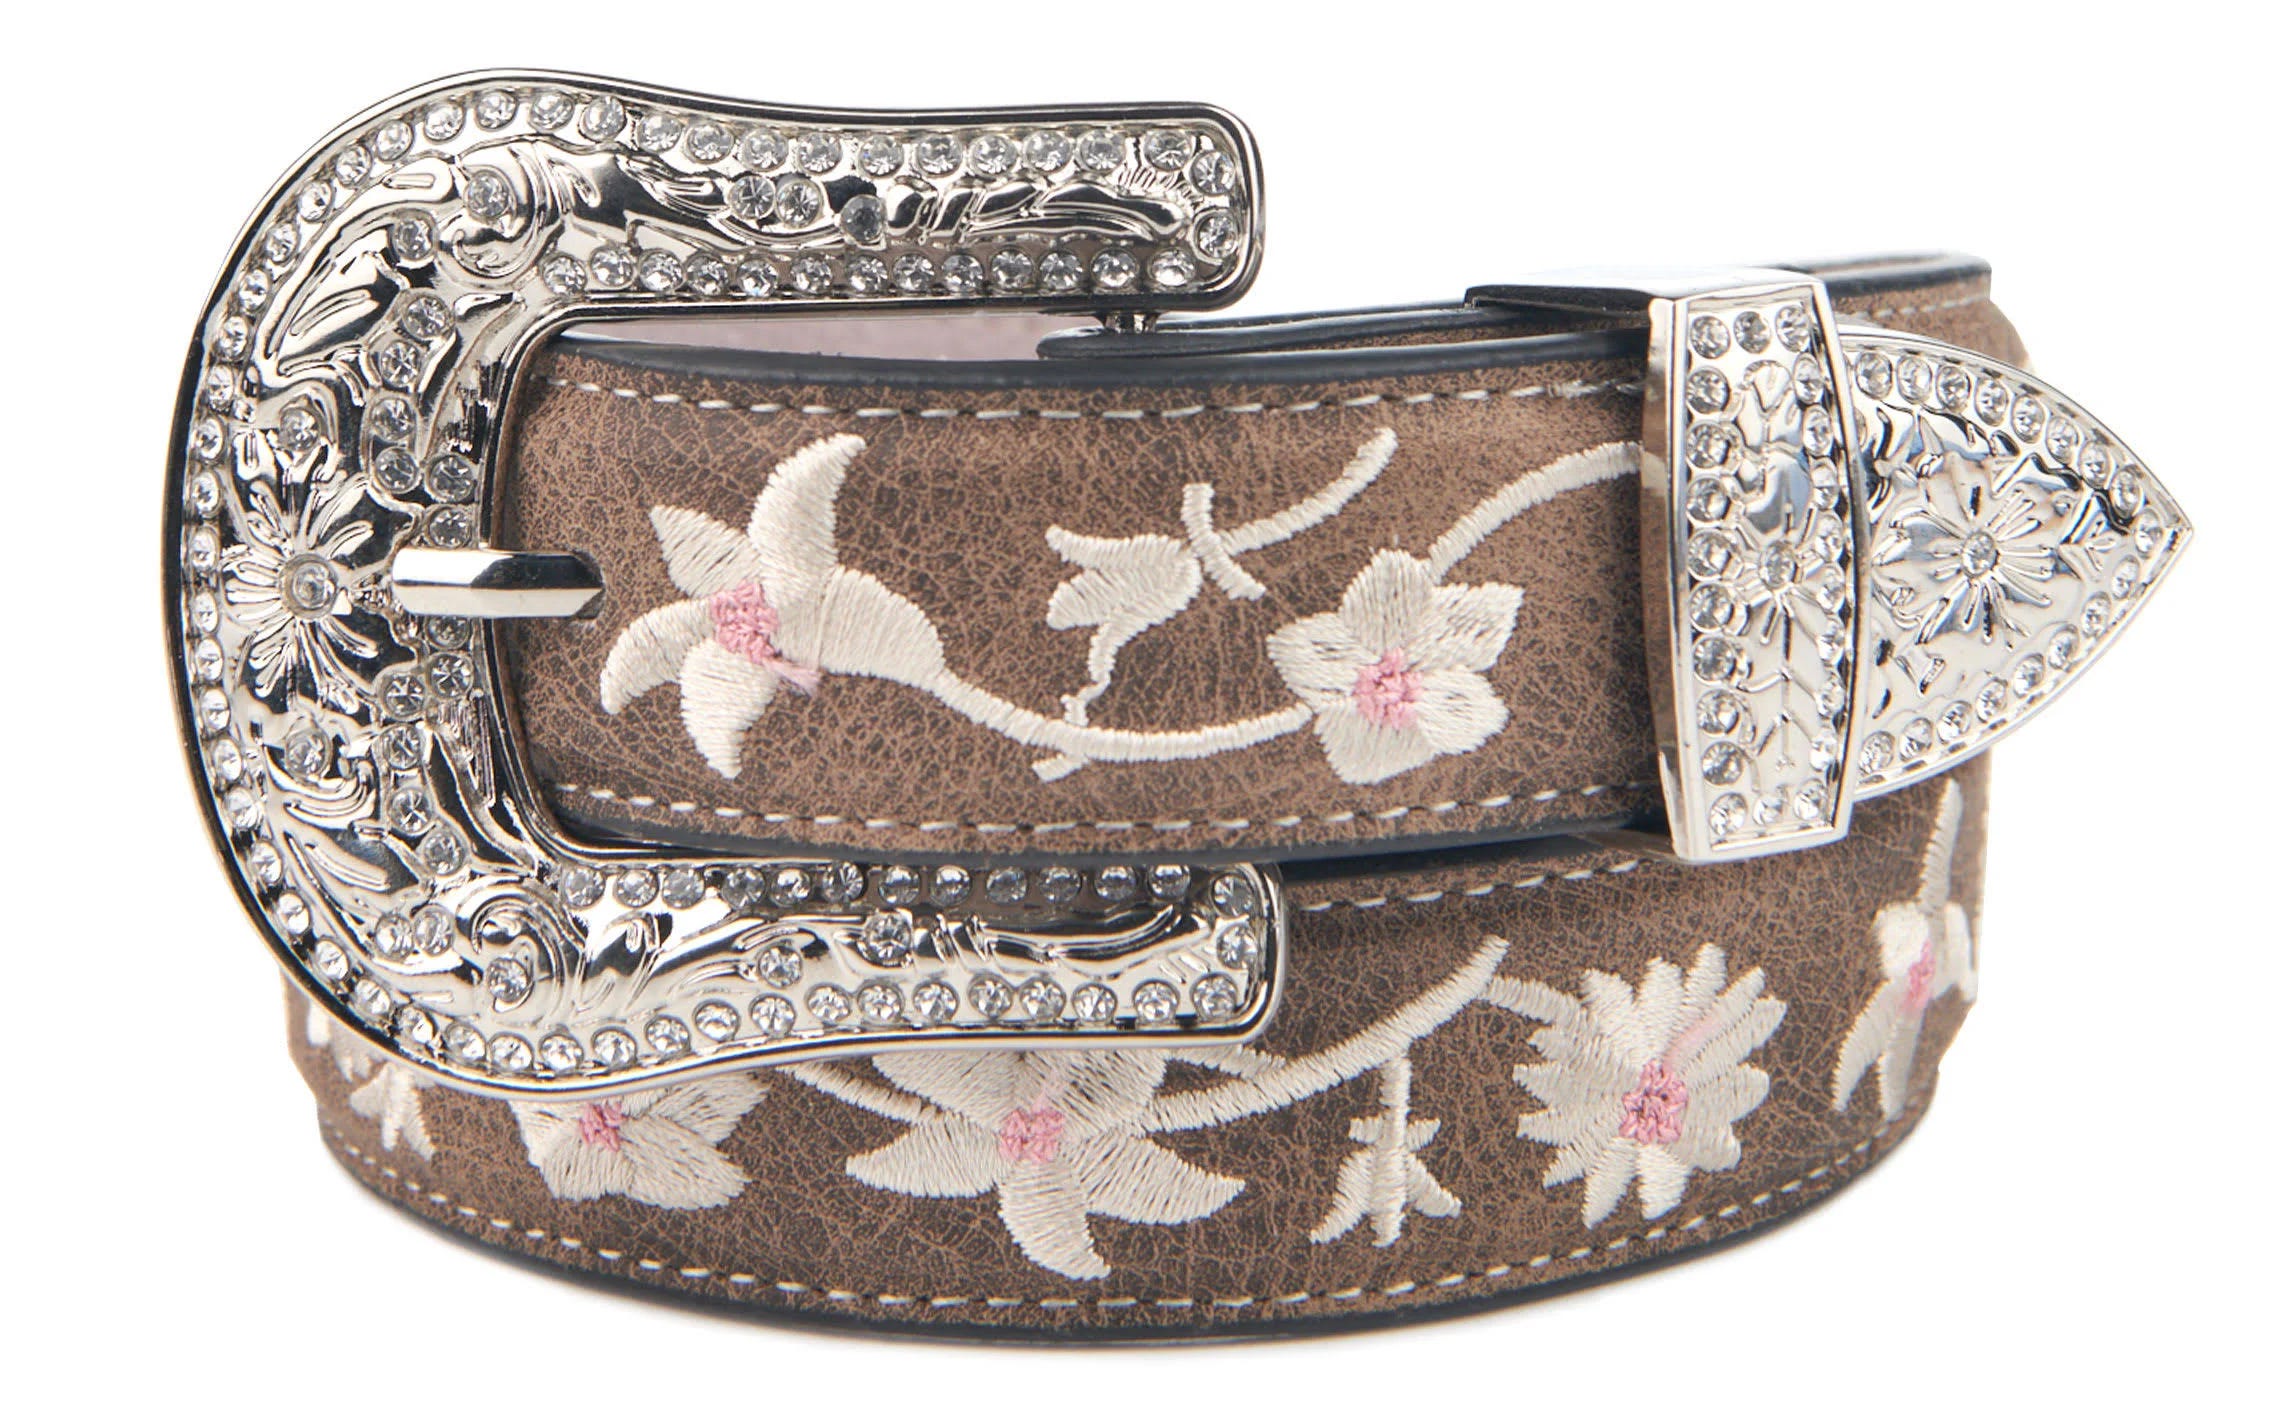 Fashionable Embroidered Girls Belt with Silver Buckle | Image